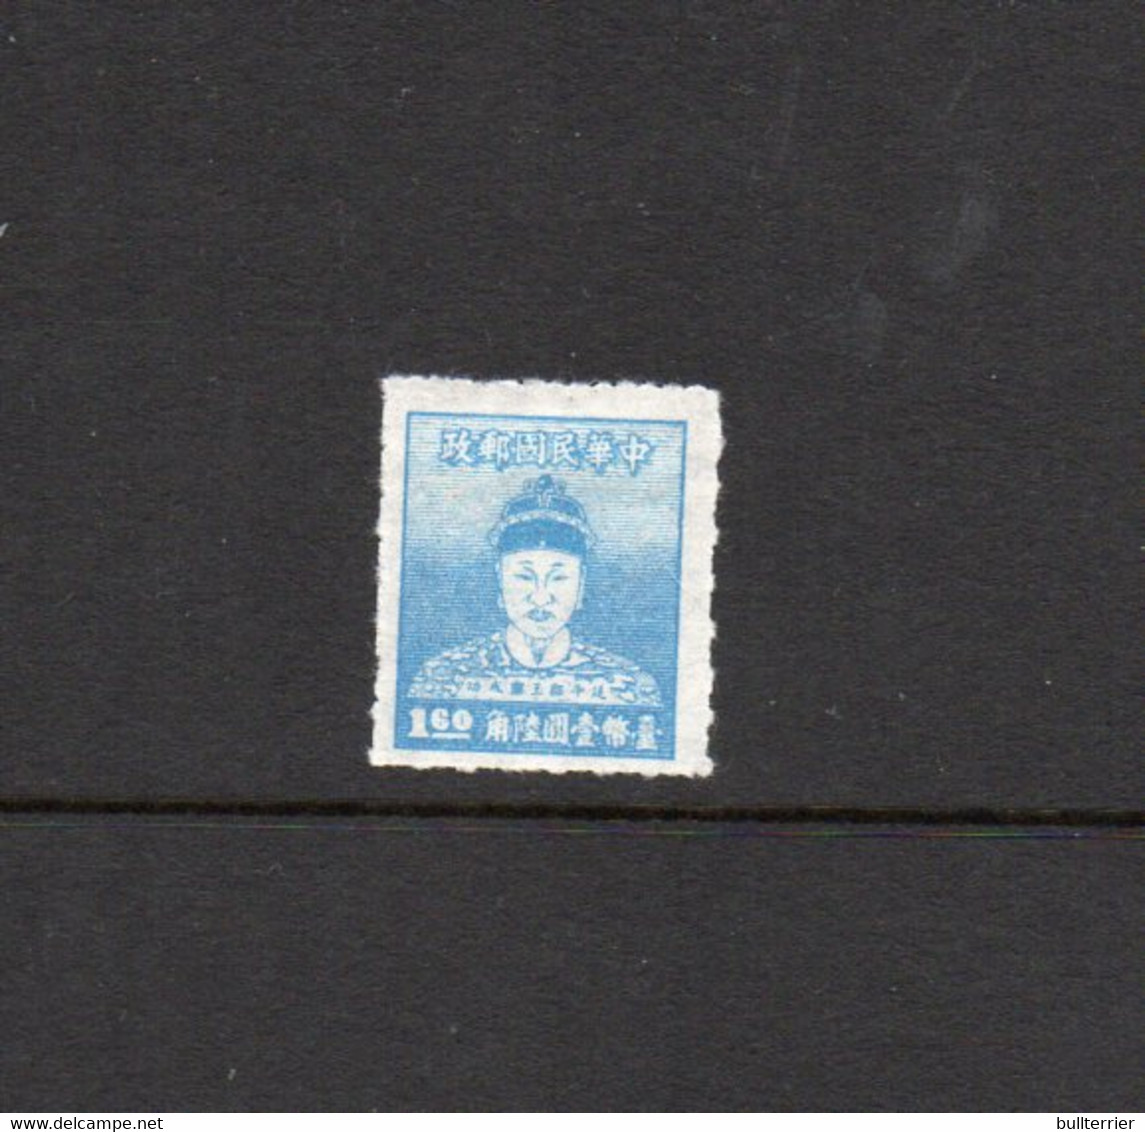 TAIWAN - 1950 - $1.60 BLUE  UNUSED AS ISSUED SG CAT £140 - Neufs